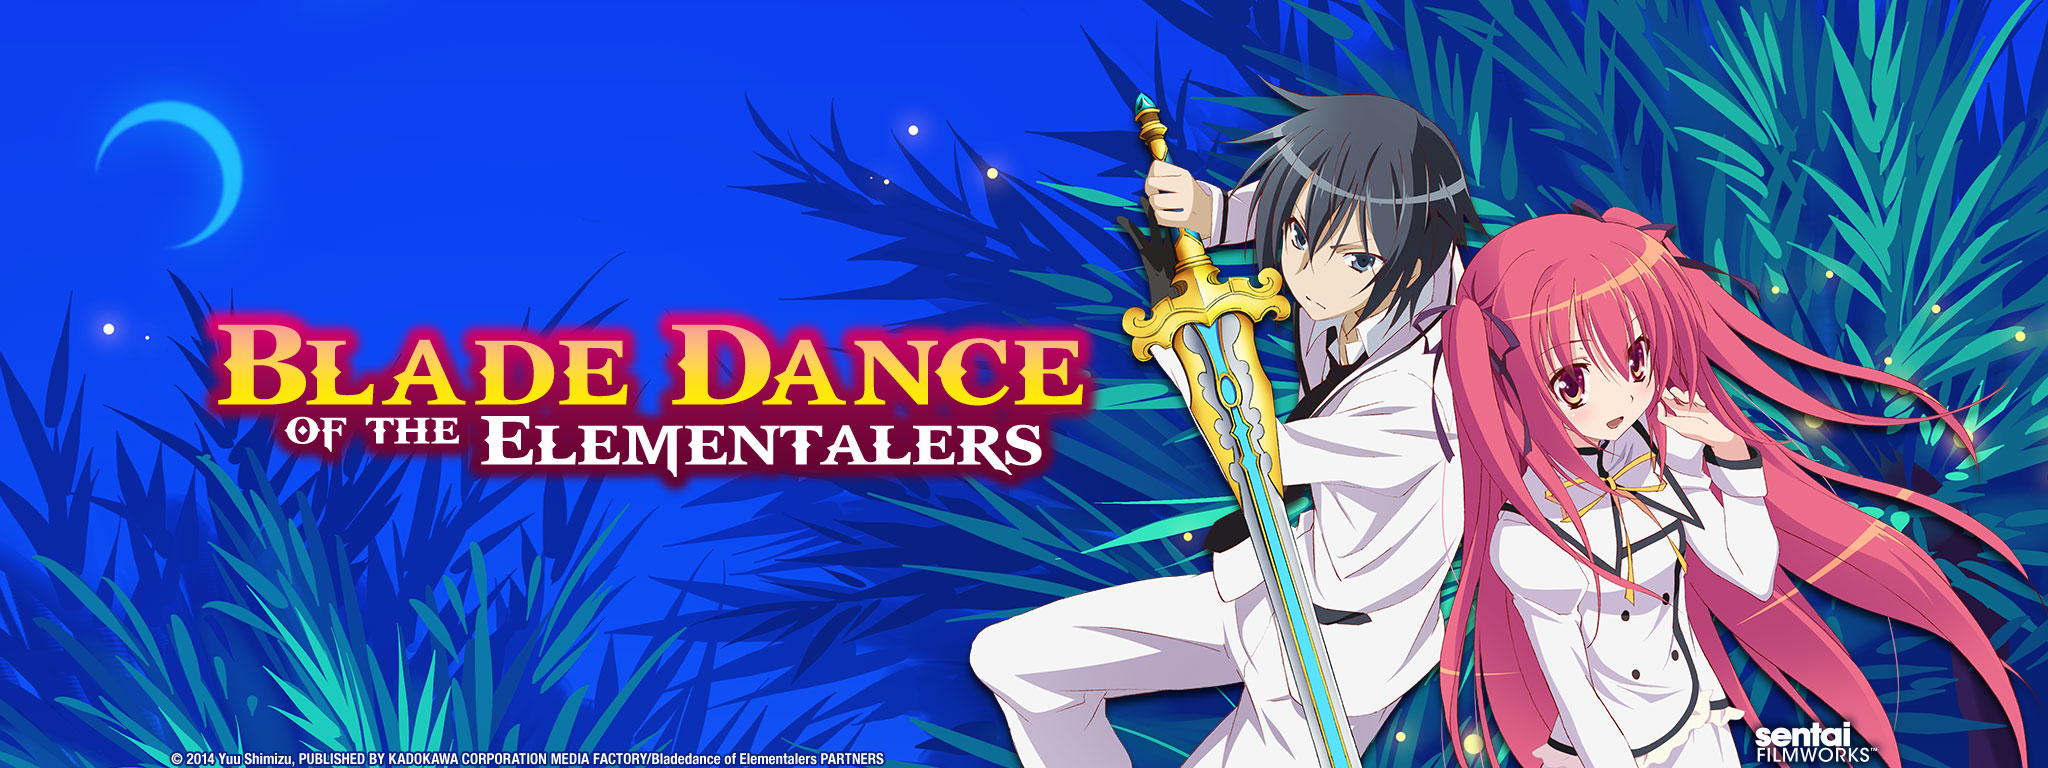 Title Art for Blade Dance of the Elementalers